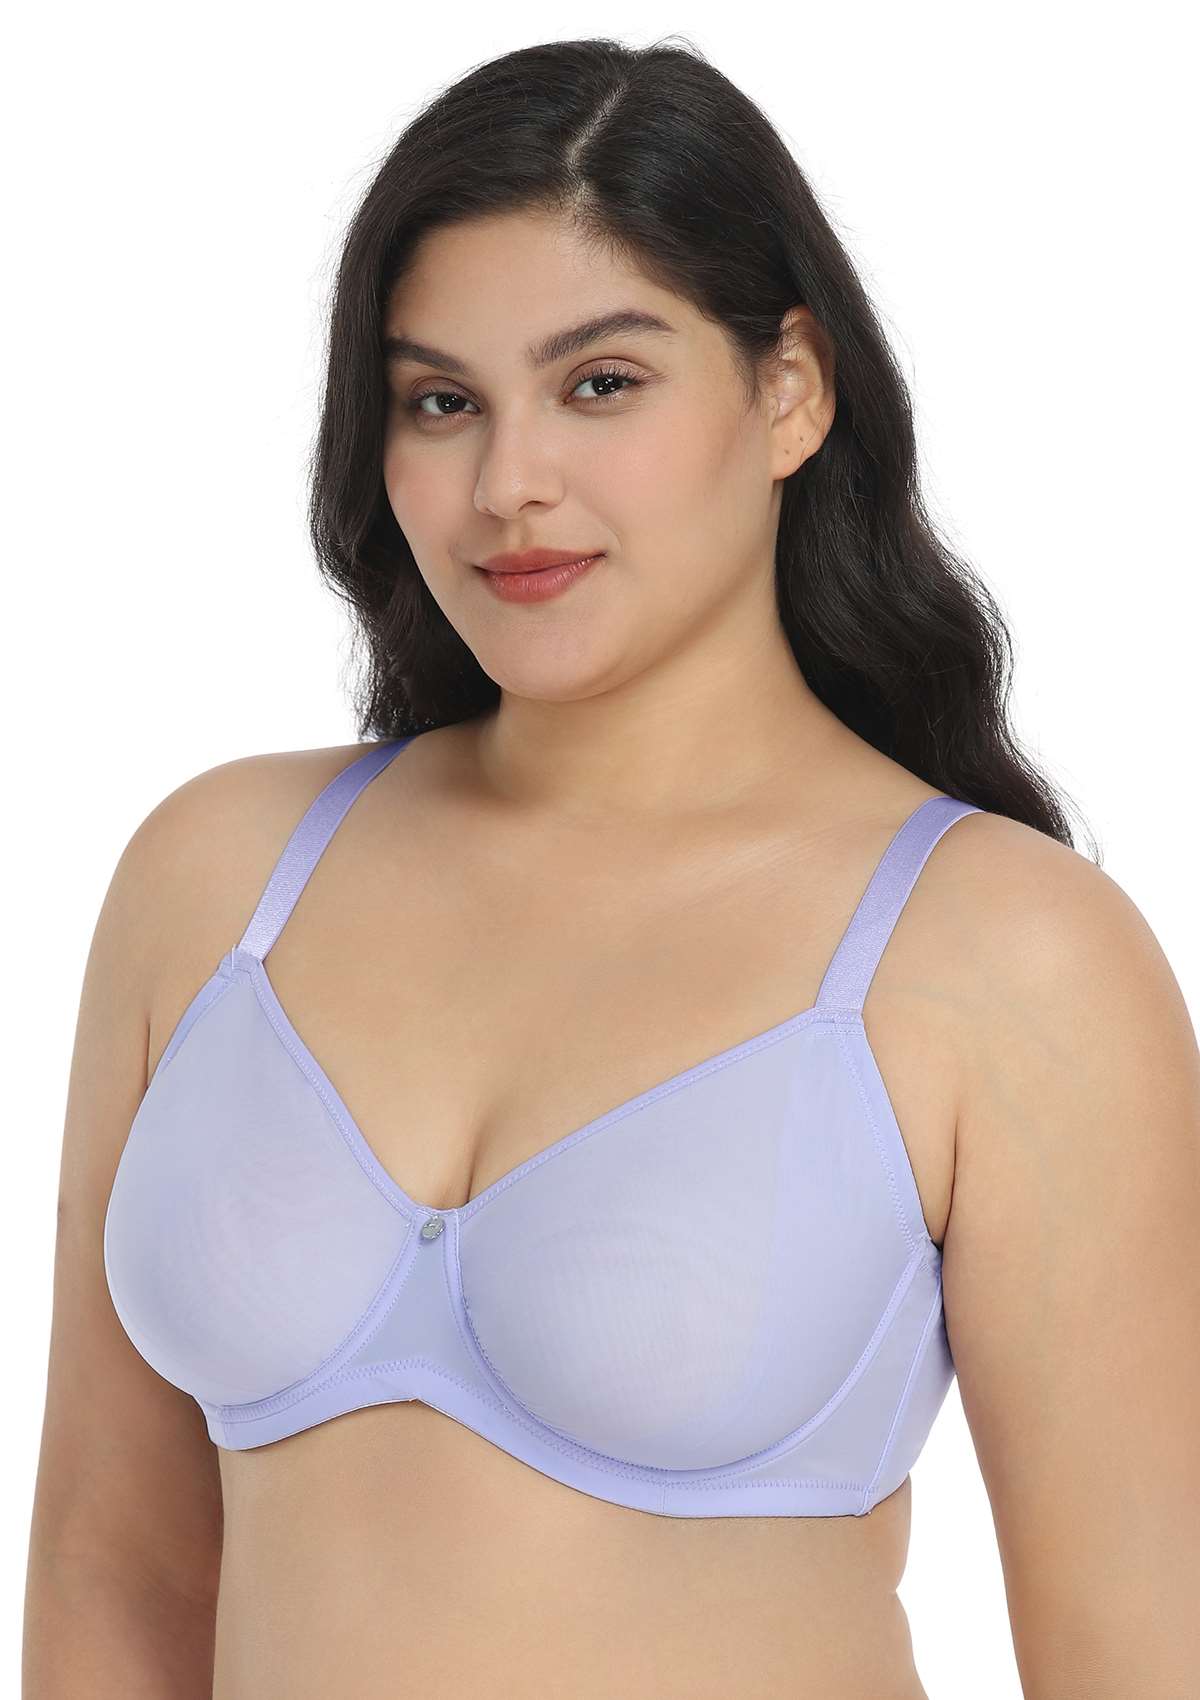 HSIA Marquita Ultimate Comfort Unlined Mesh Sheer Airy Underwire Bra - 44 / D / Black